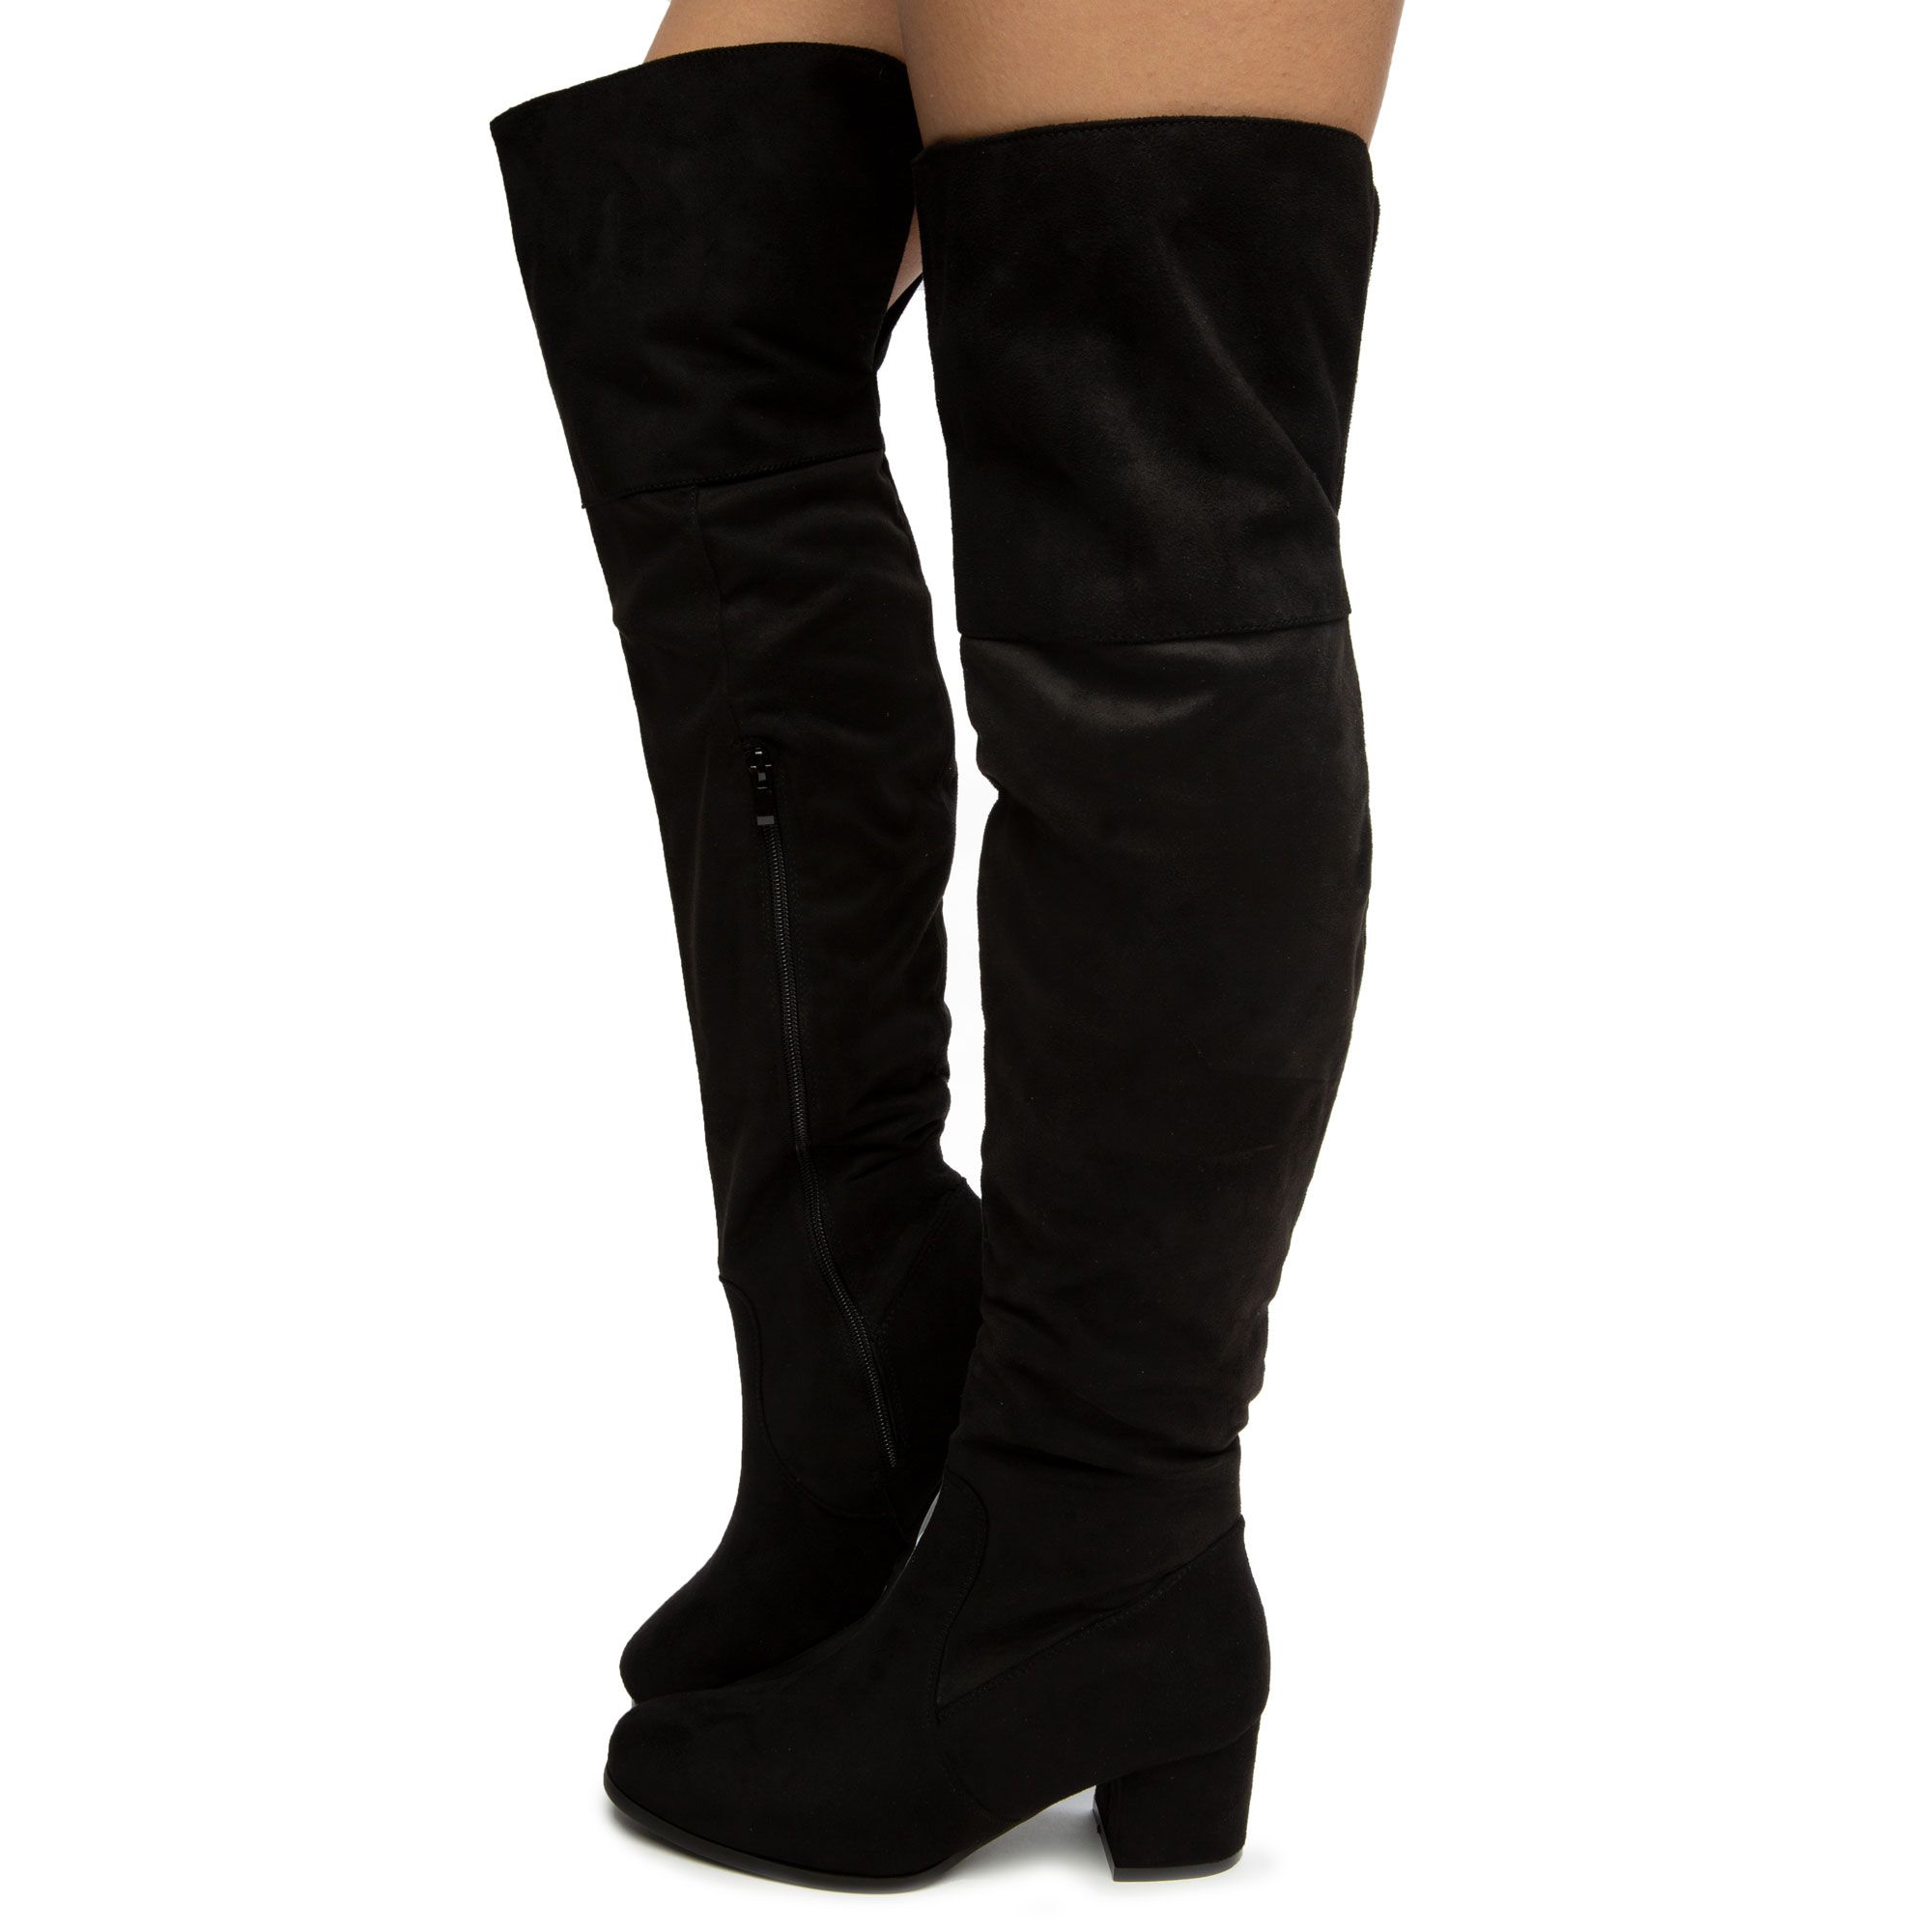 TWIN TIGER FOOTWEAR Linden-01 Over The Knee Boots LINDEN-01OK-BLK - Shiekh